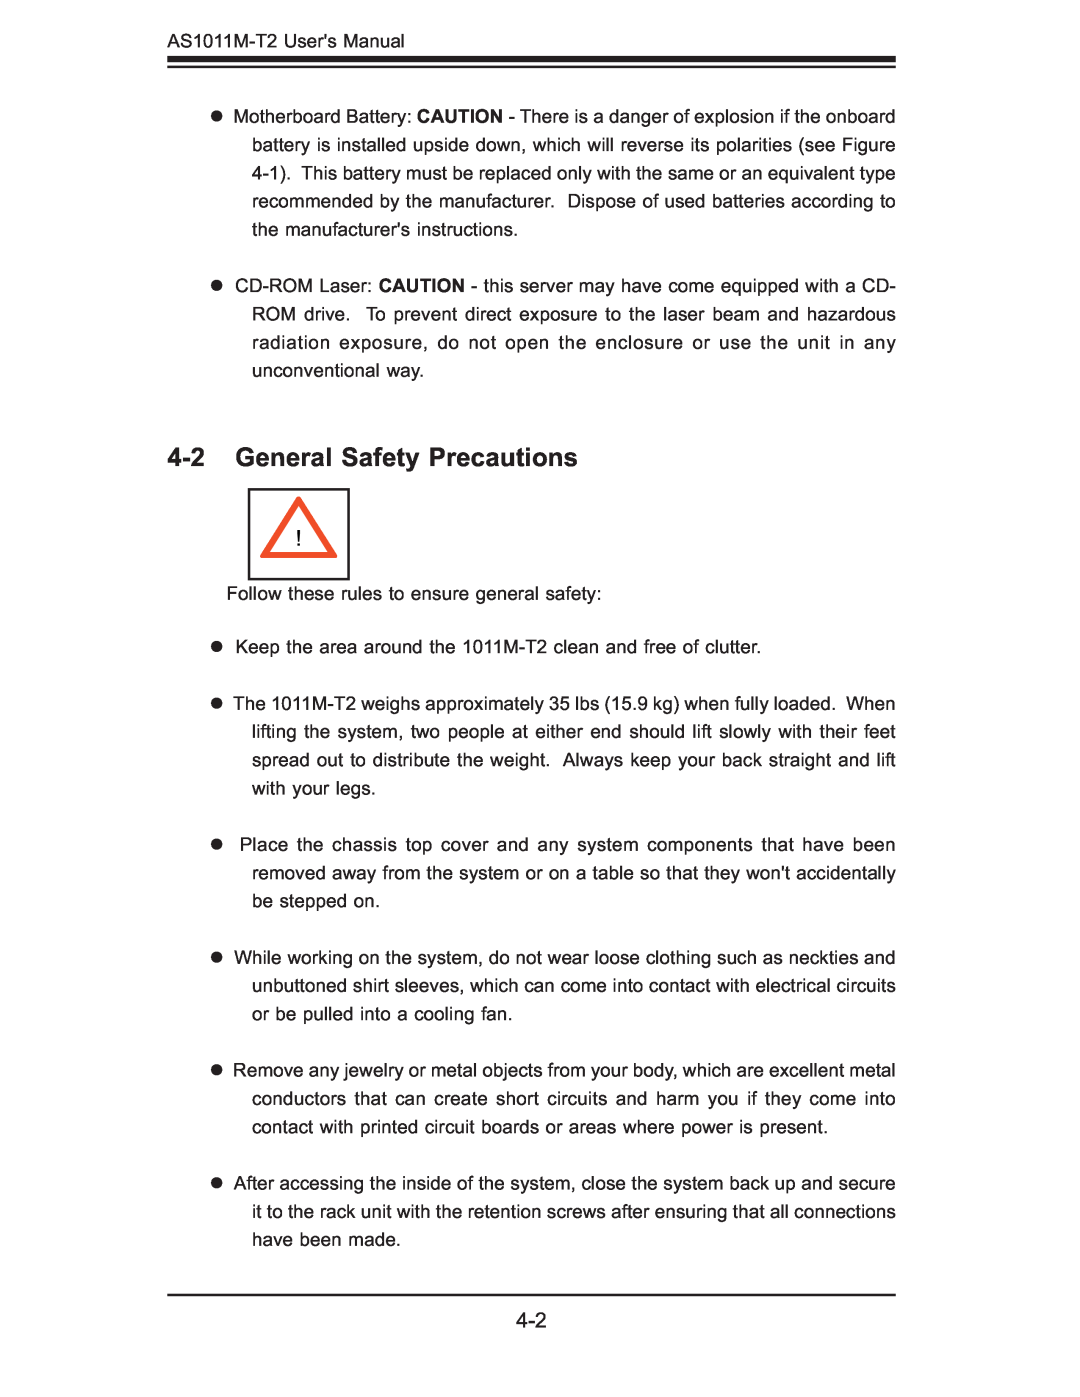 SUPER MICRO Computer AS1011M-T2 user manual General Safety Precautions 